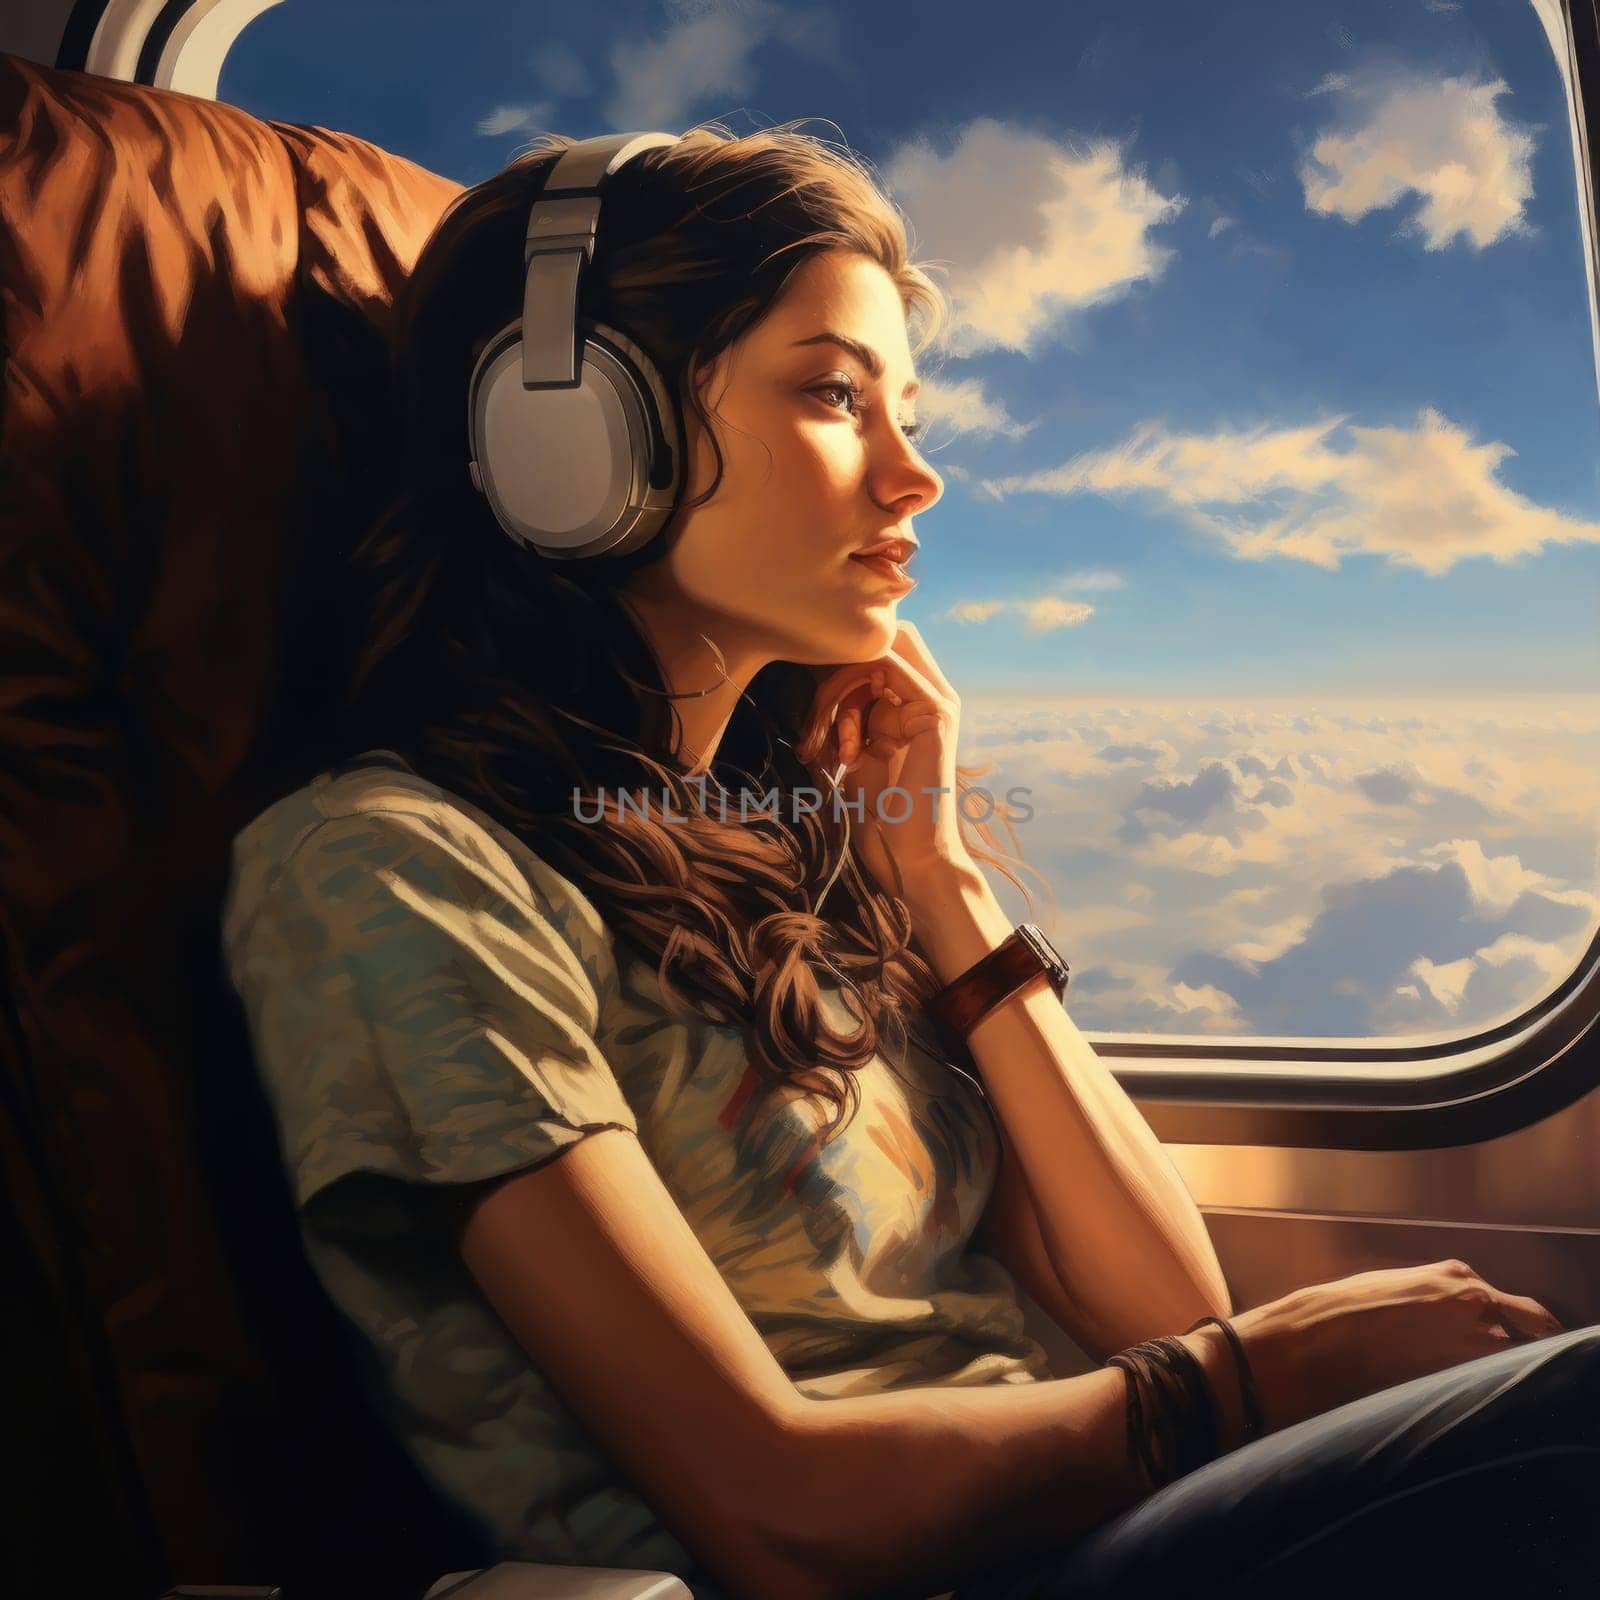 A woman wearing headphones sits on an airplane, engrossed in her music.